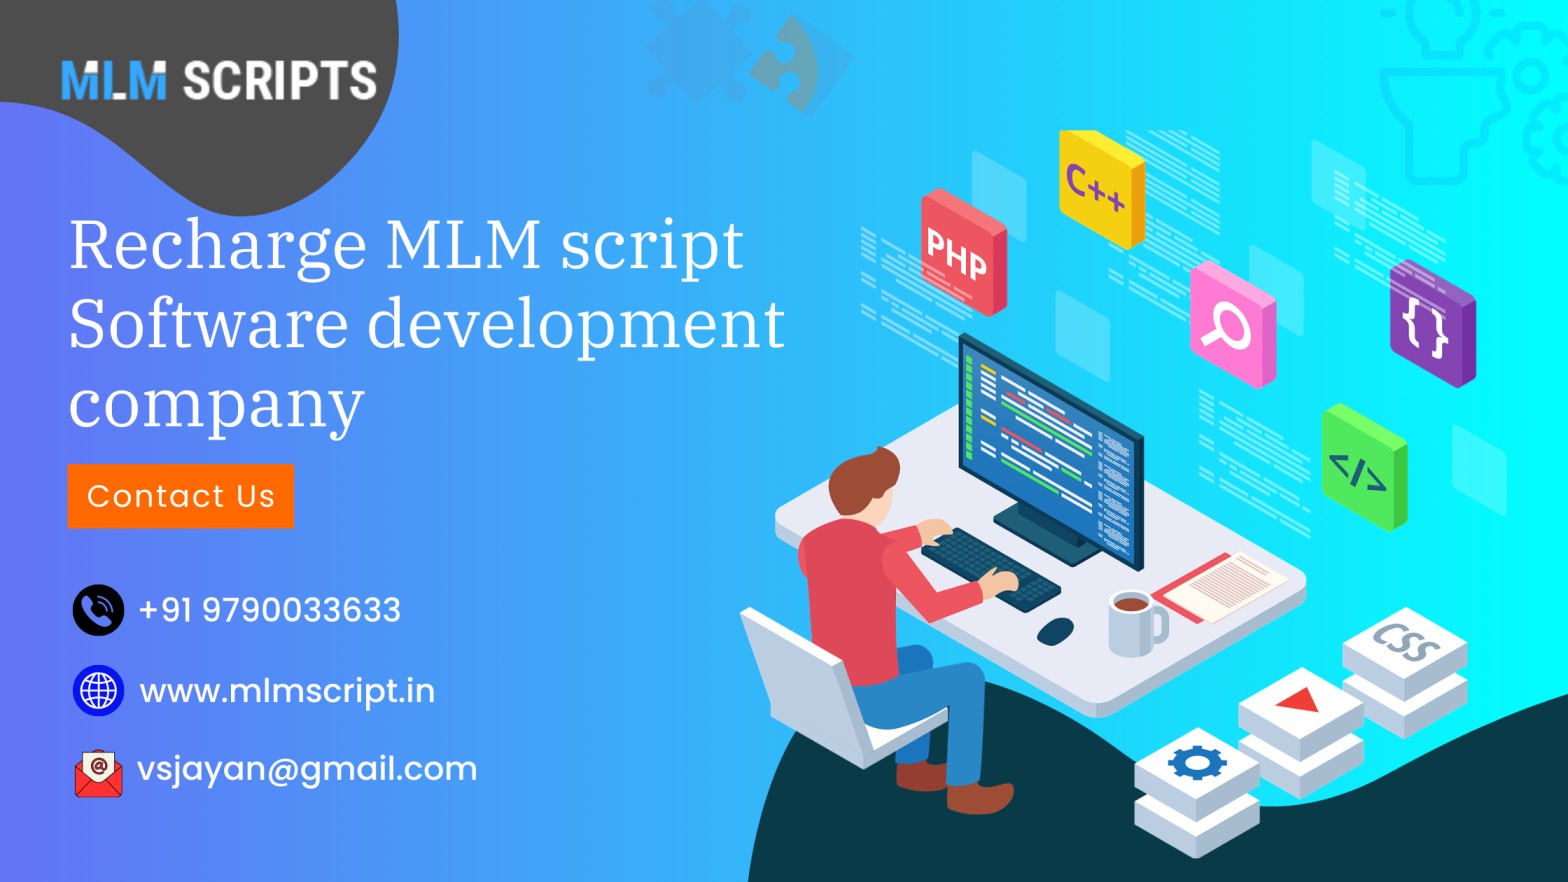 Recharge MLM script Software development company,Chennai,Services,Other Services,77traders